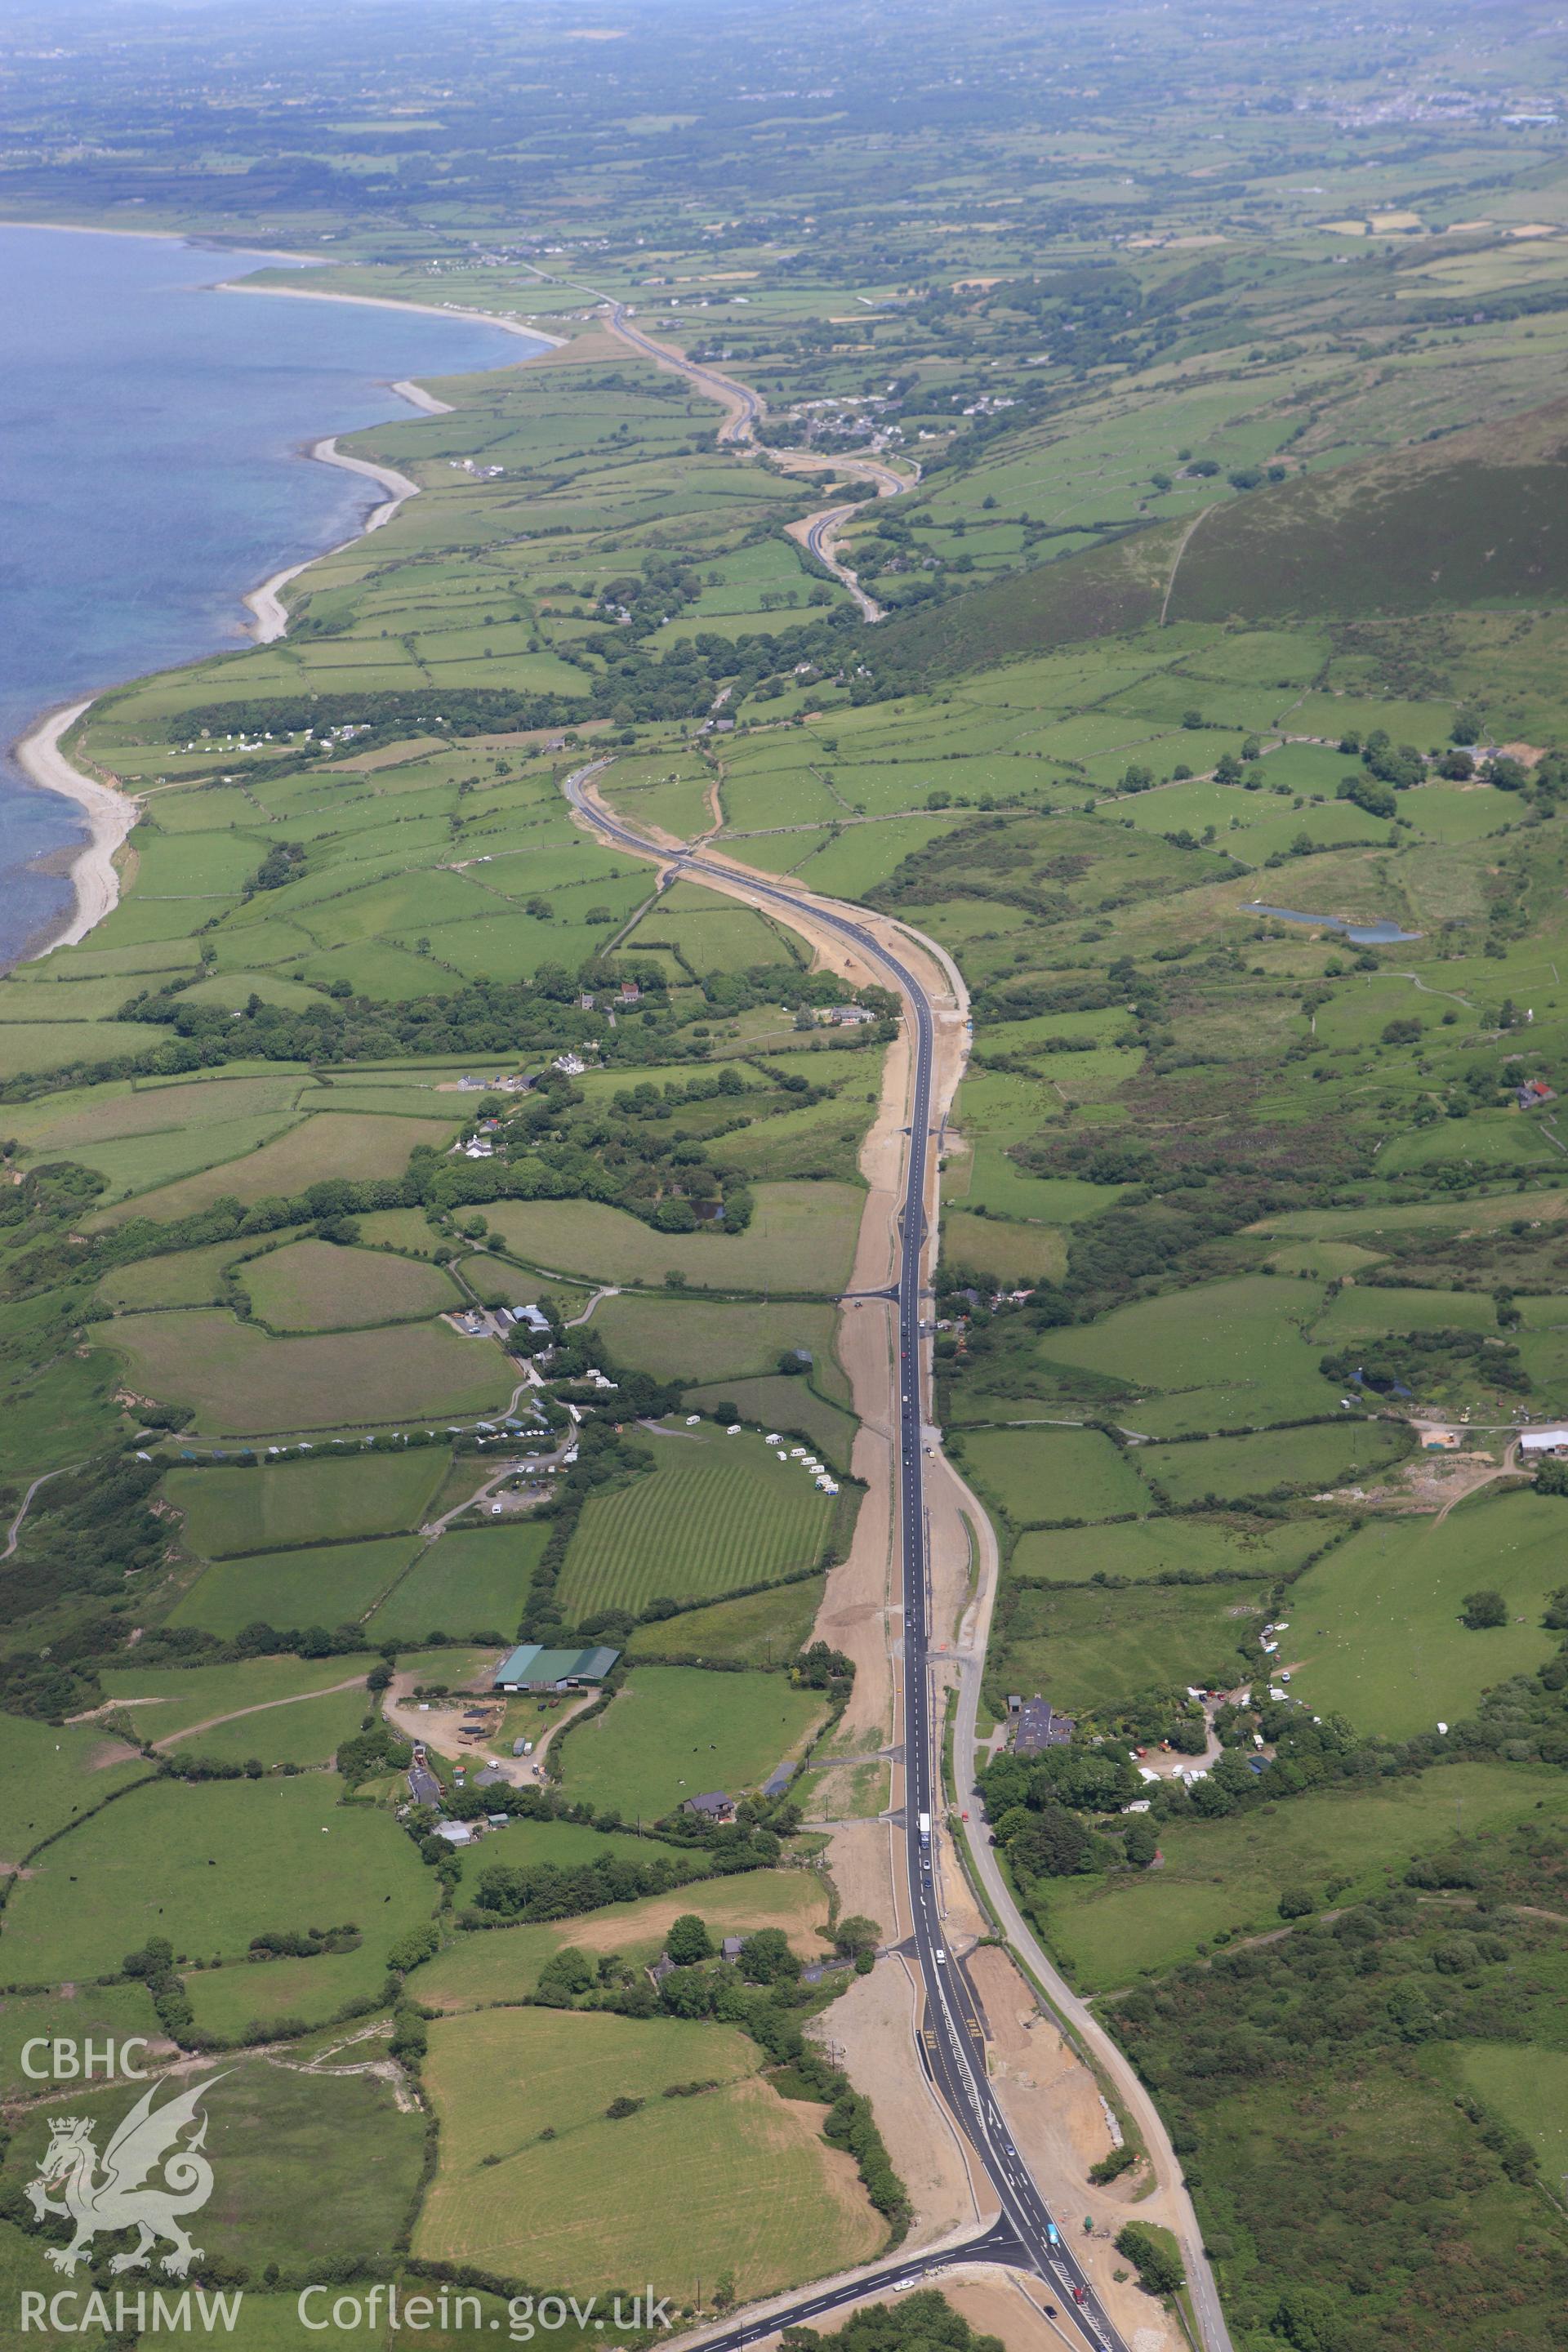 RCAHMW colour oblique aerial photograph of Cefn Burddau. Taken on 16 June 2009 by Toby Driver